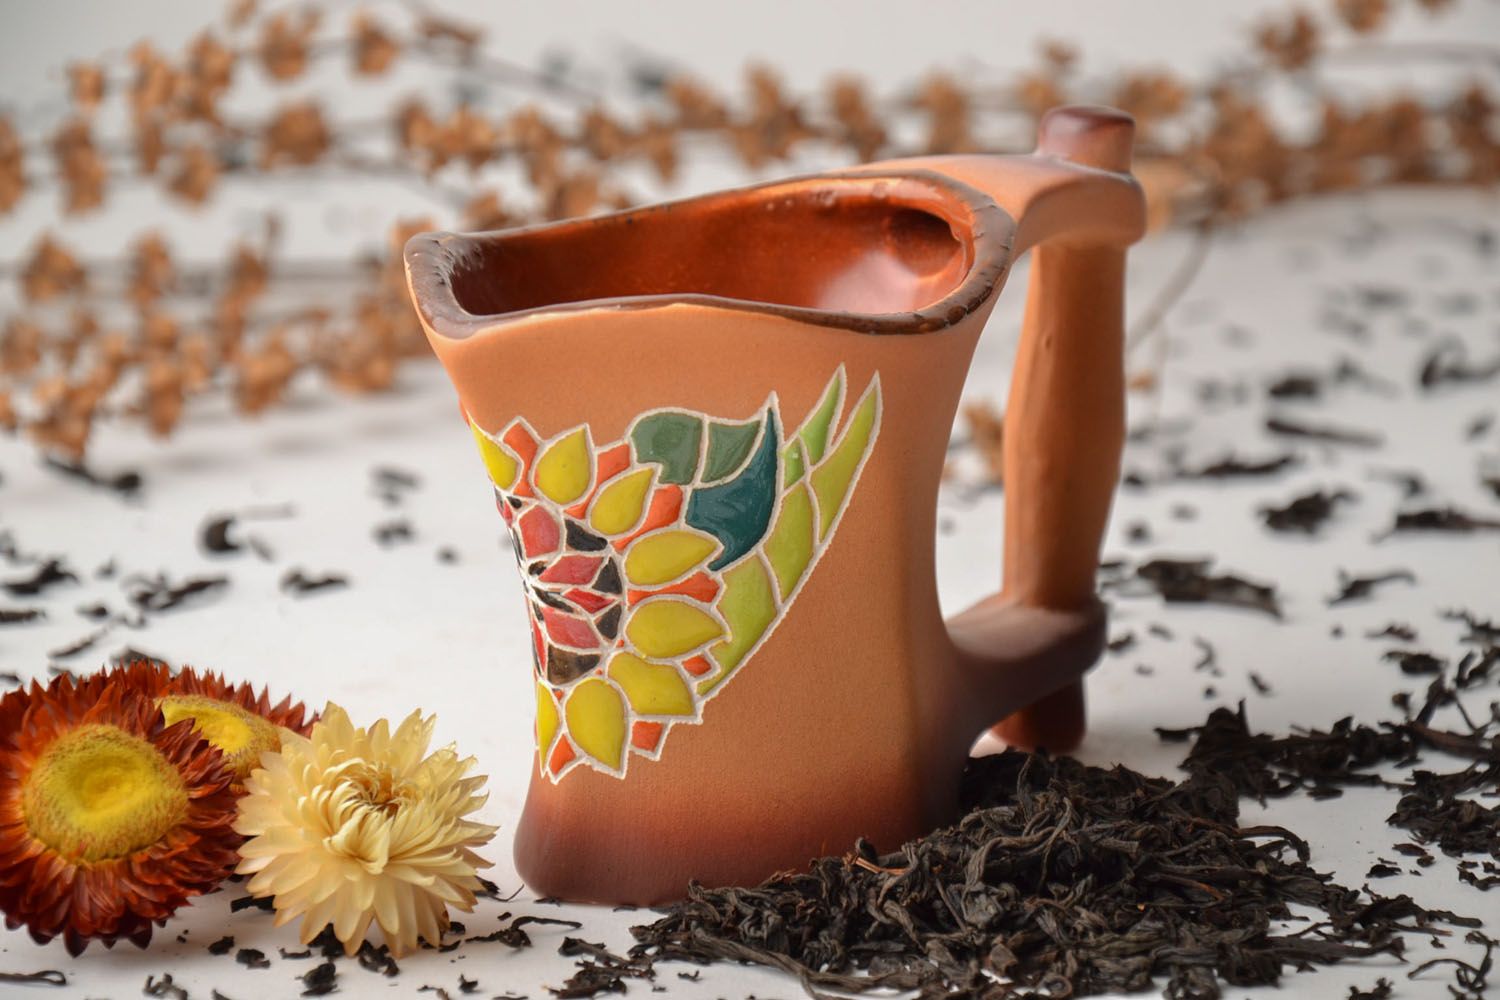 Handmade ceramic coffee cup with handle and sunflower pattern 0,63 lb photo 1